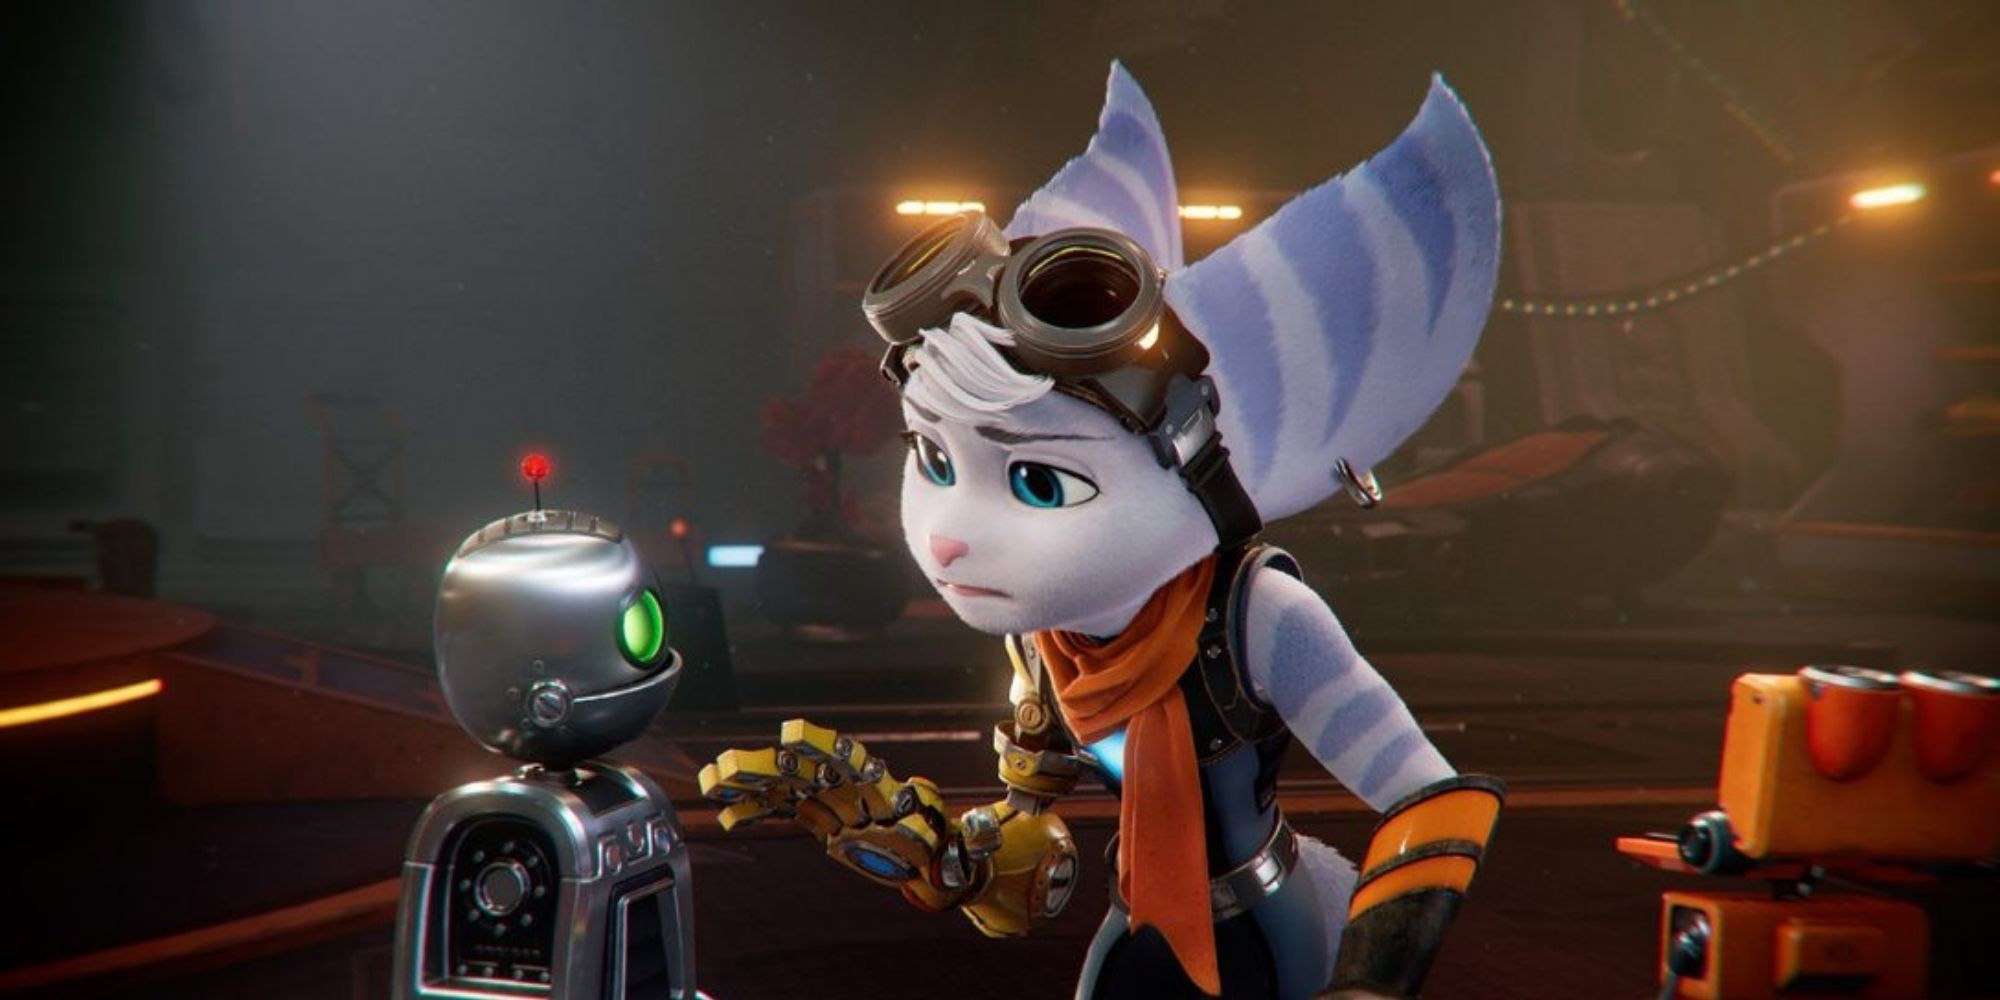 Rivet meeting clank from Ratchet and Clank a rift apart